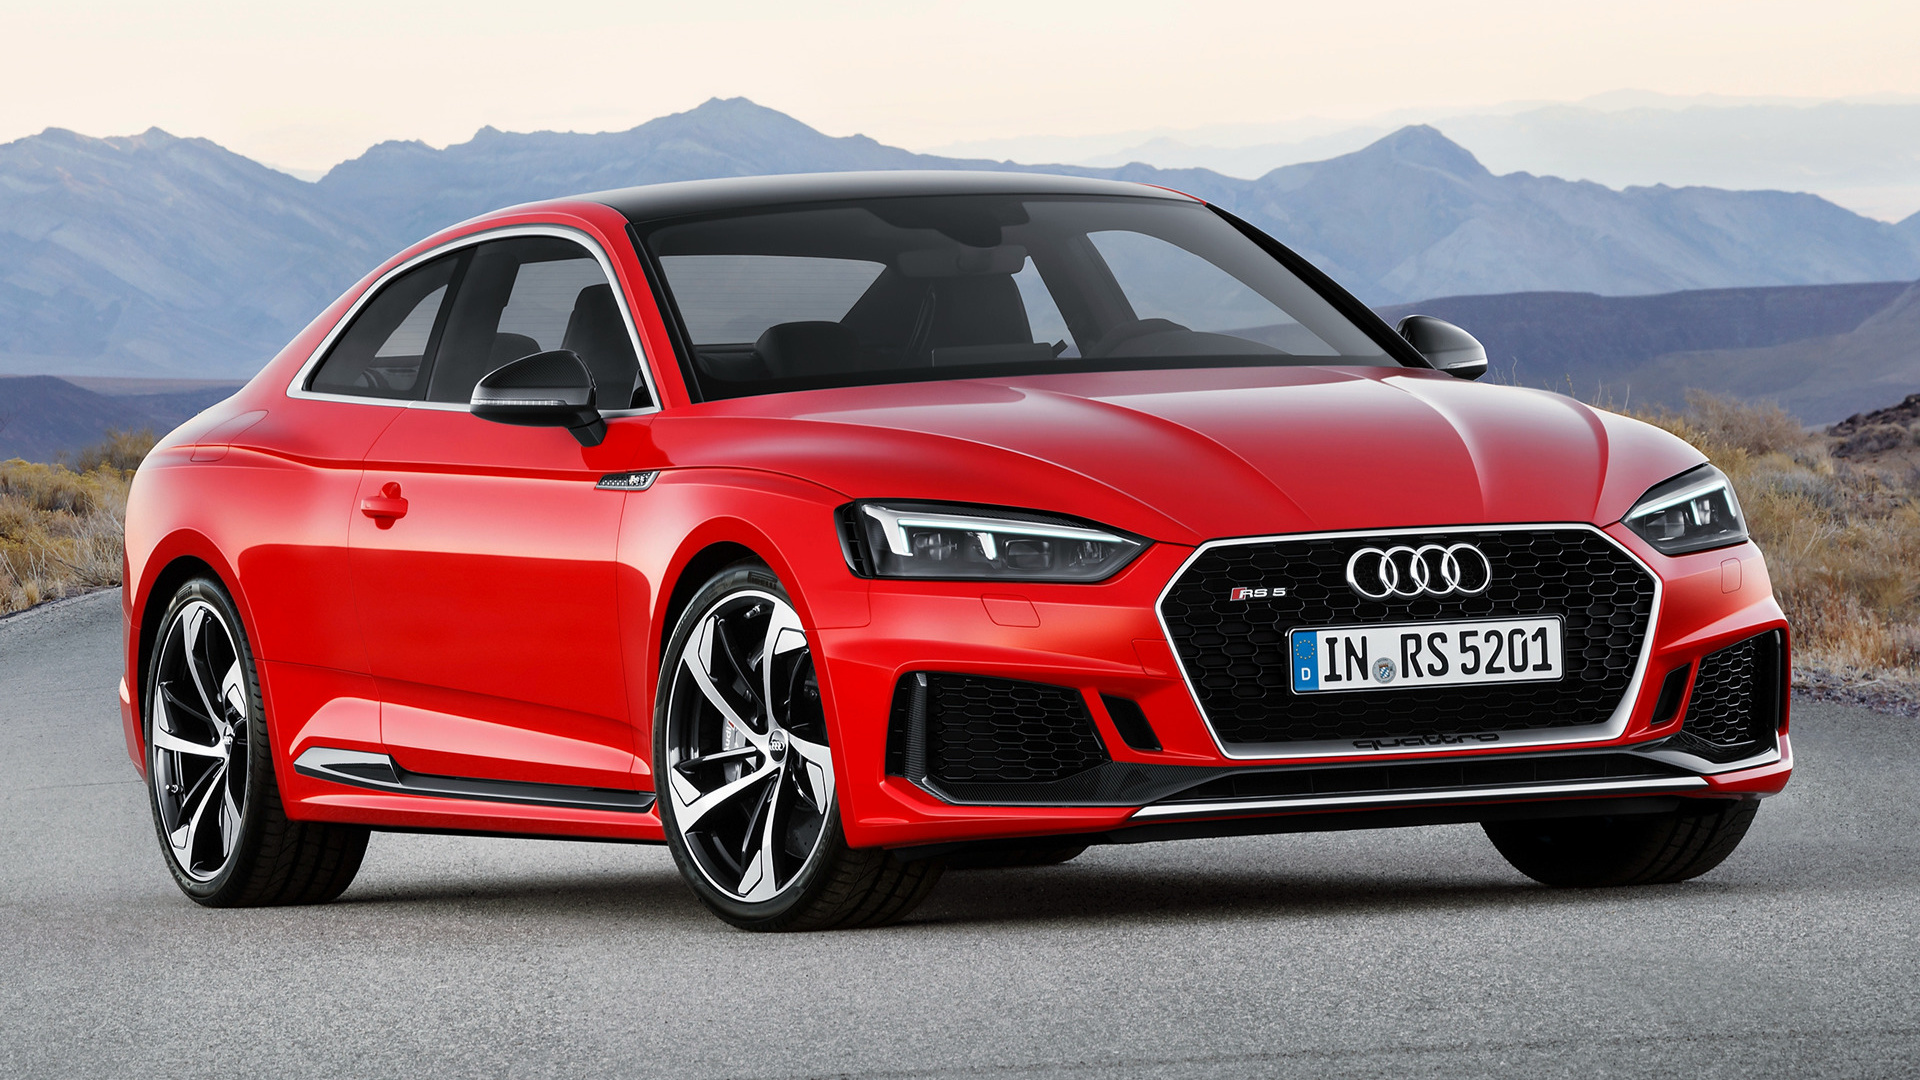 Audi Rs5 Car Coupe Luxury Car Red Car 1920x1080